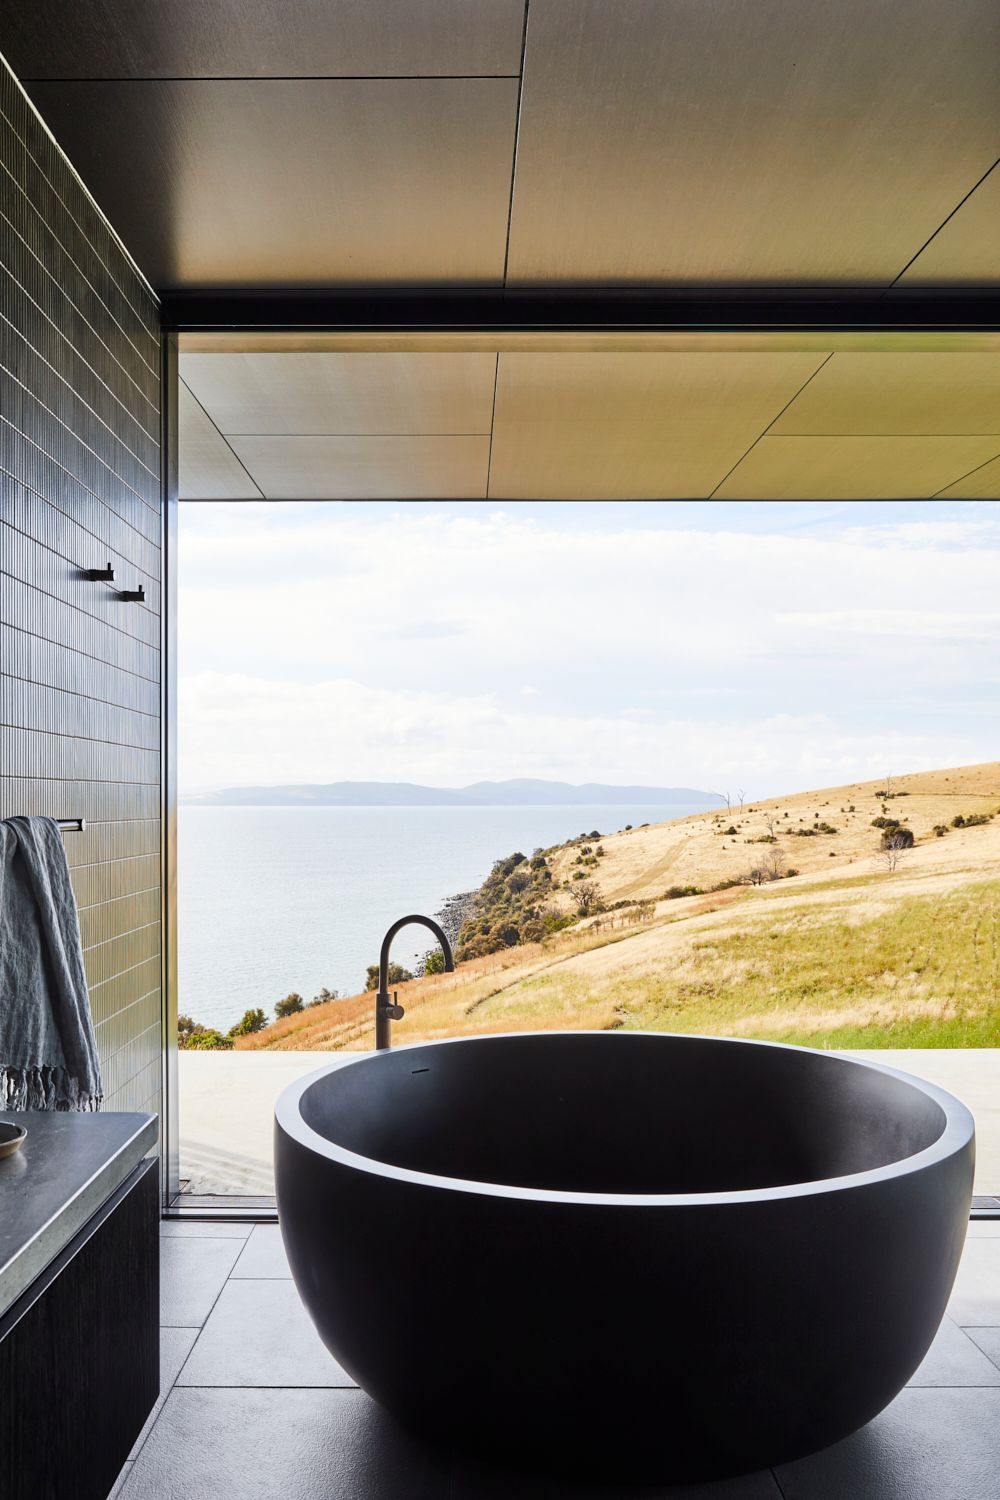 The Point Tasmania by Tanner Architects showing a round bathtub that overlooks an ocean view and rolling hills